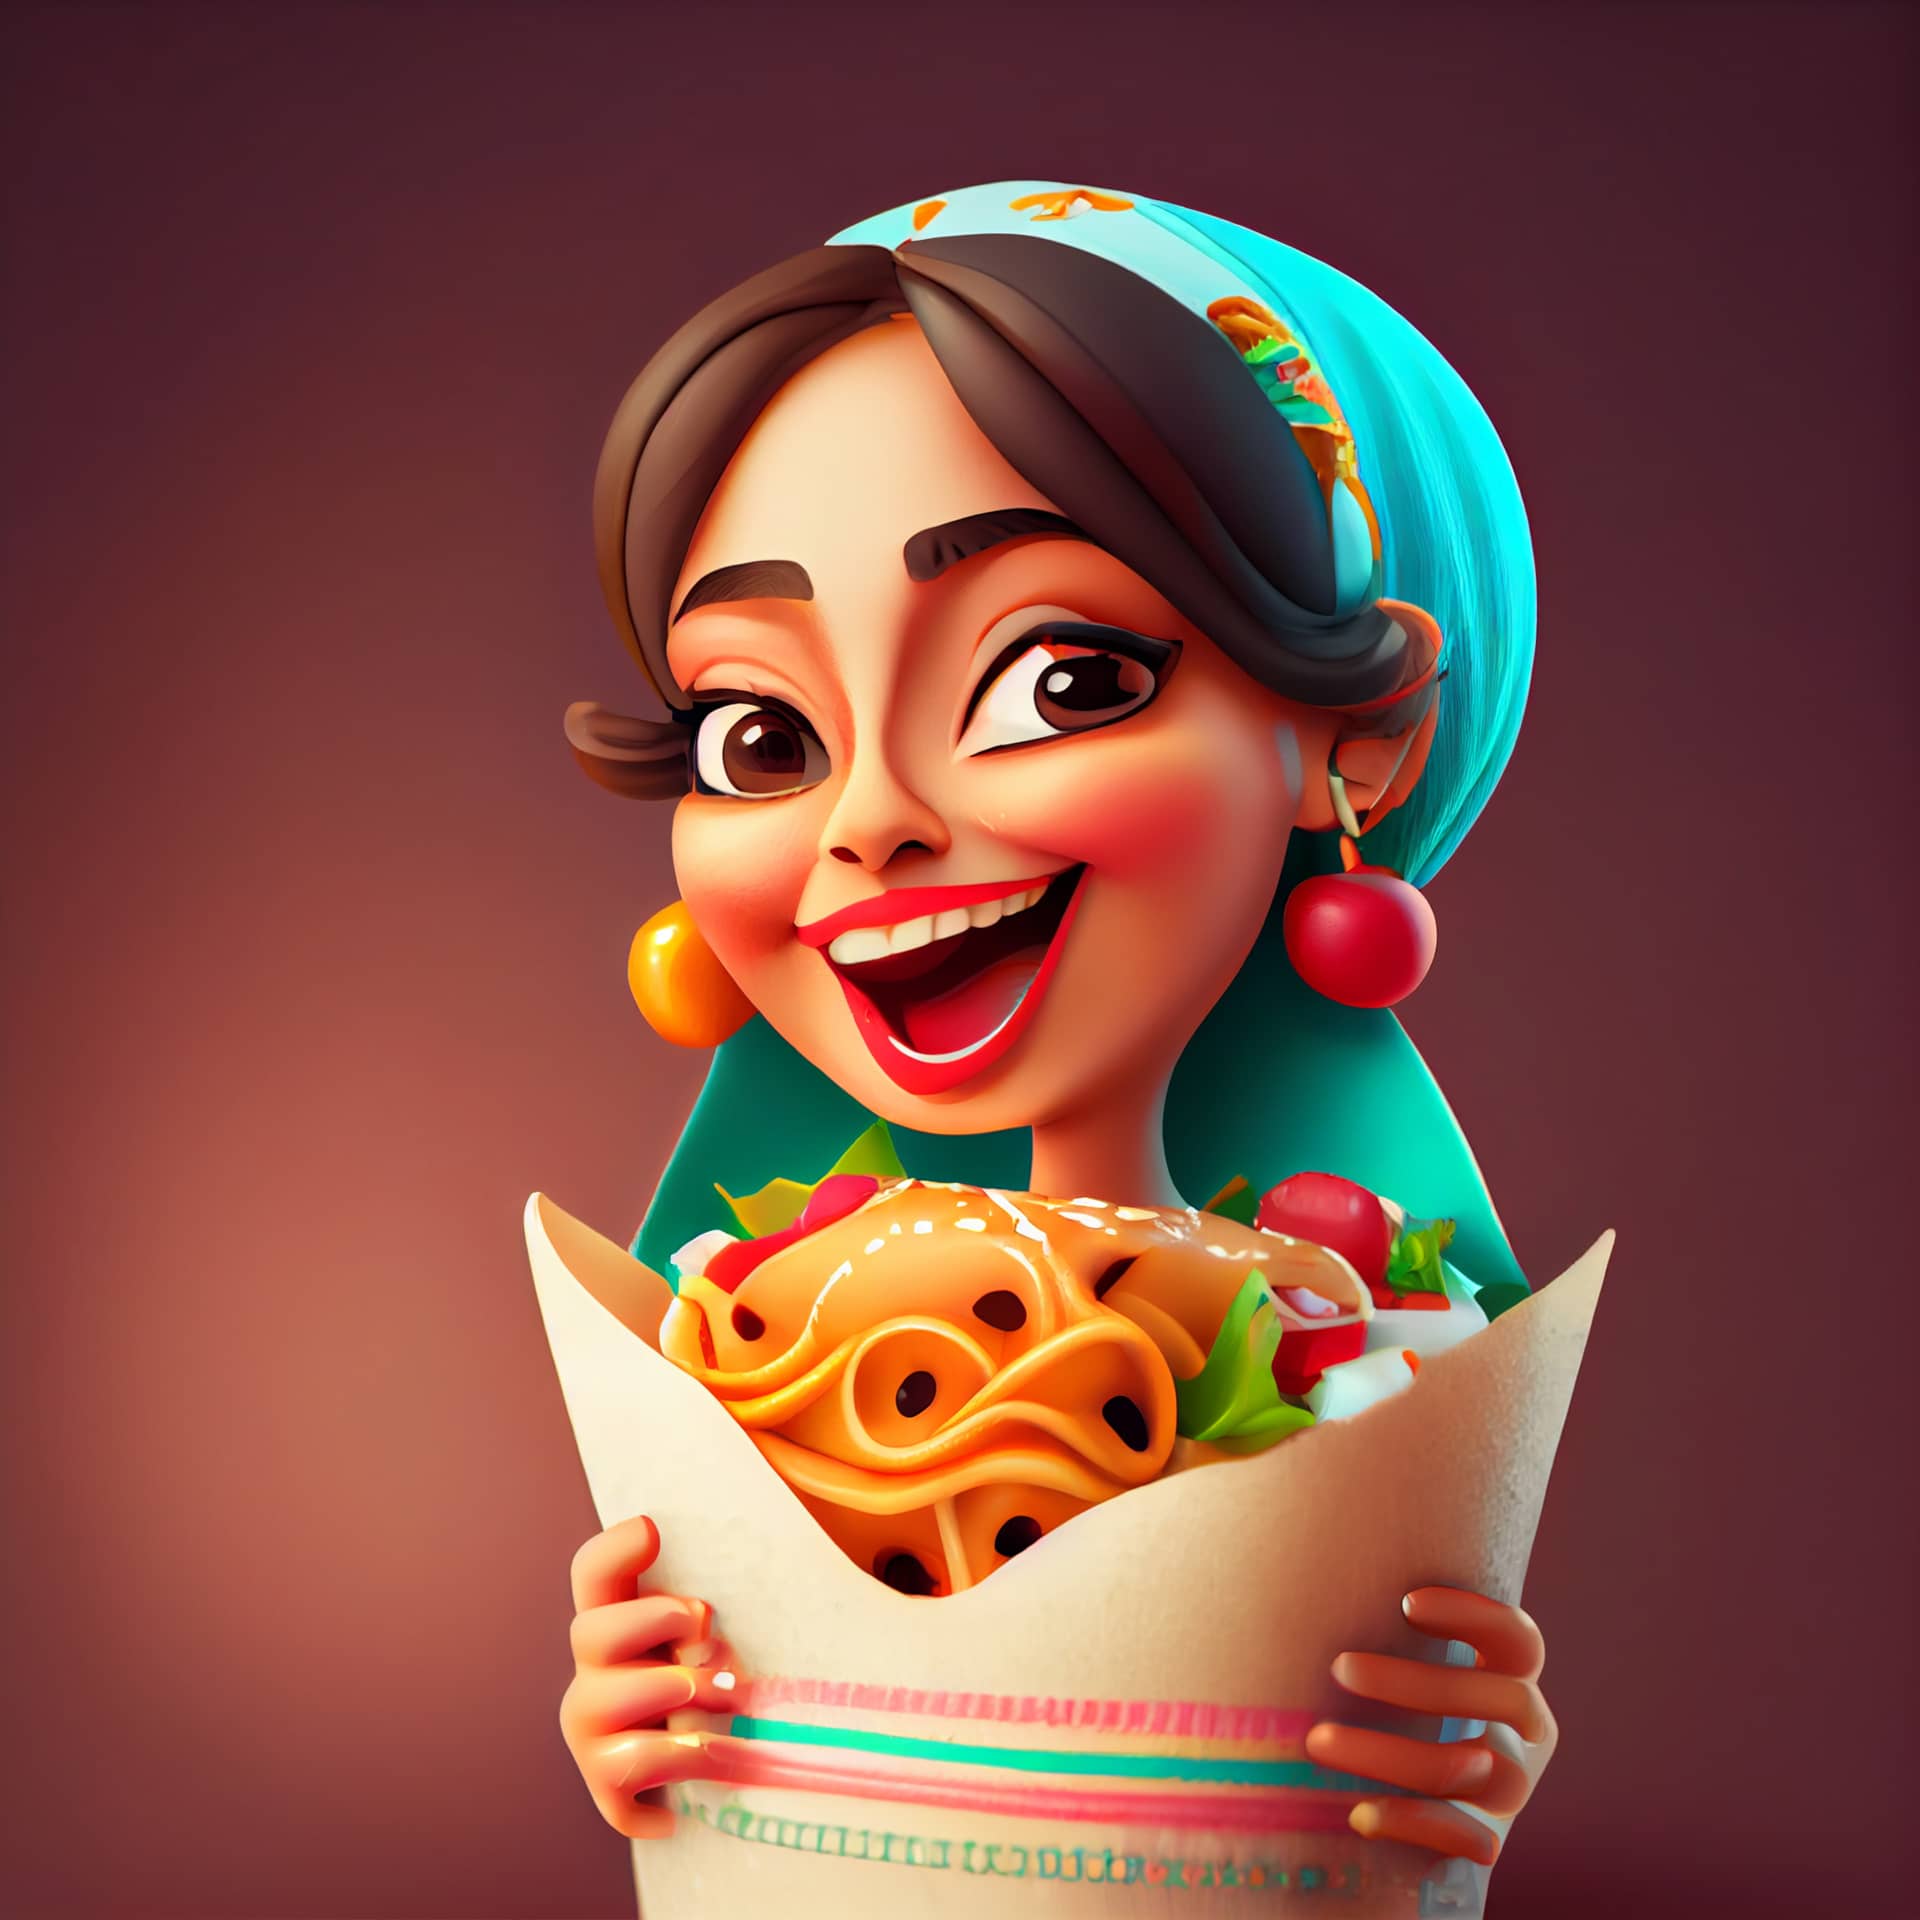 Cartoon profile pictures mexican woman eating tacos street food illustration